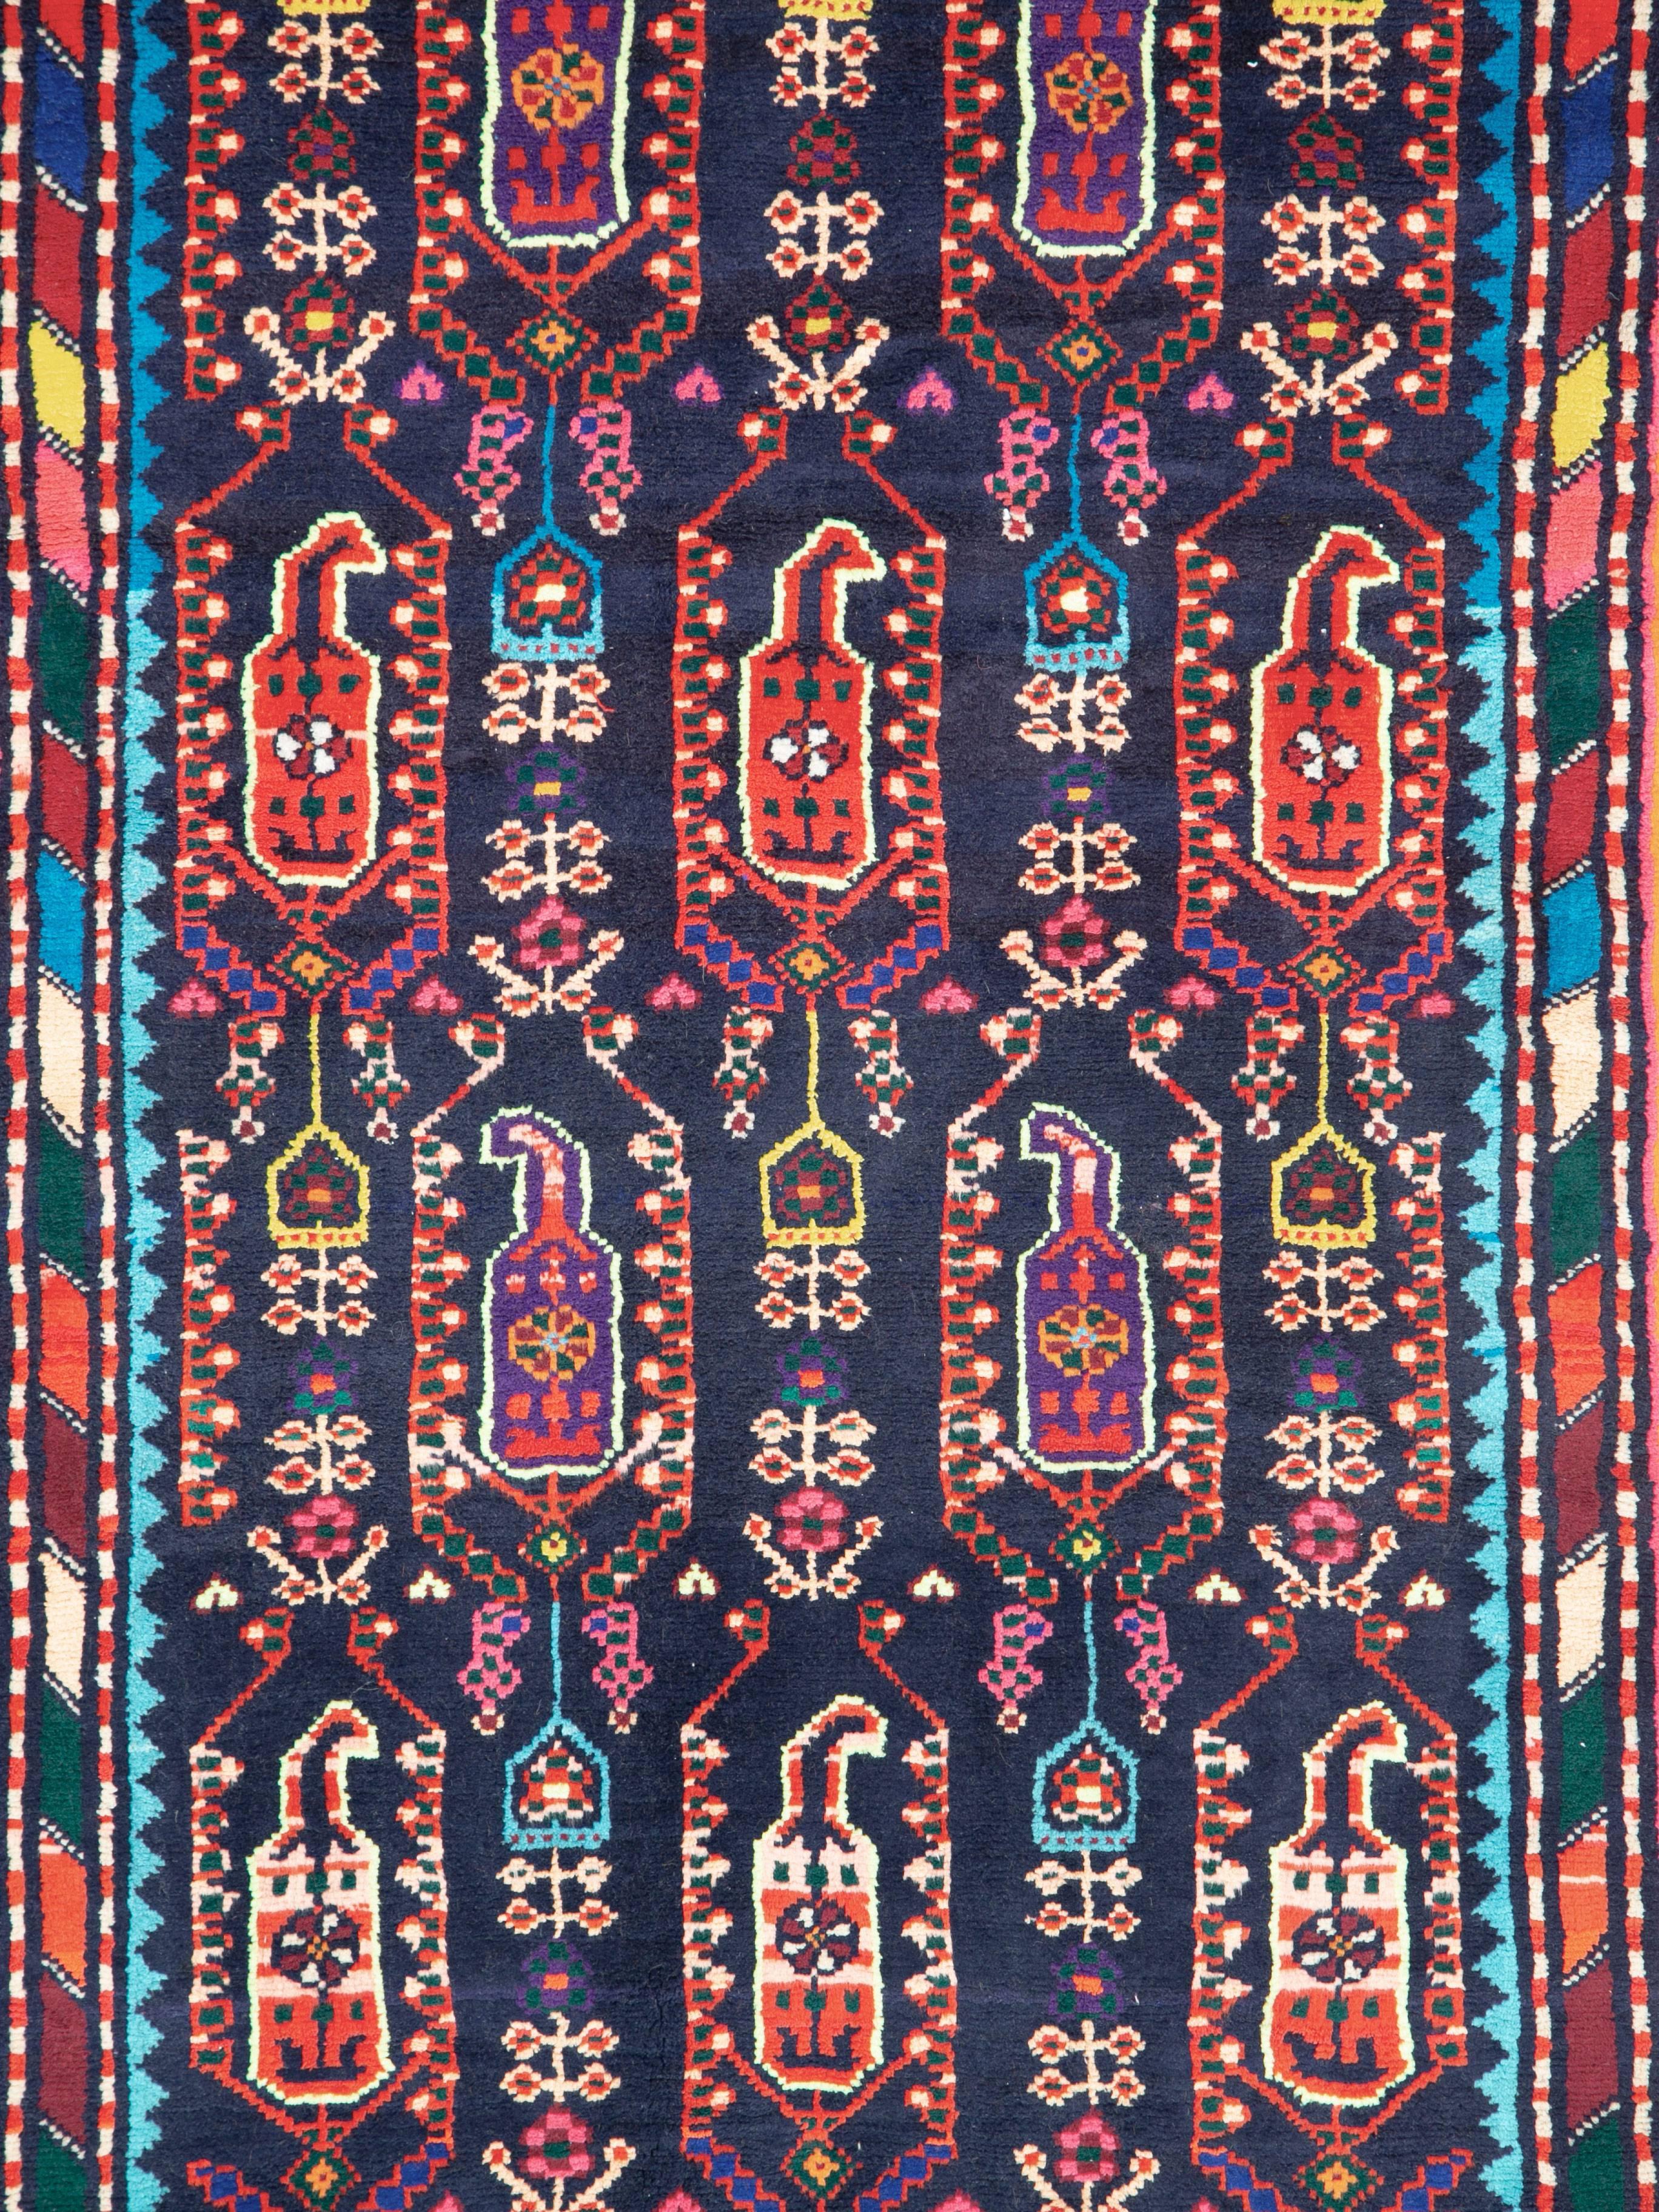 A vintage Persian Malayer folk rug in runner format from the mid-20th century. The primary field and border colors are midnight blue and orange with secondary devices that are bright and multicolored.